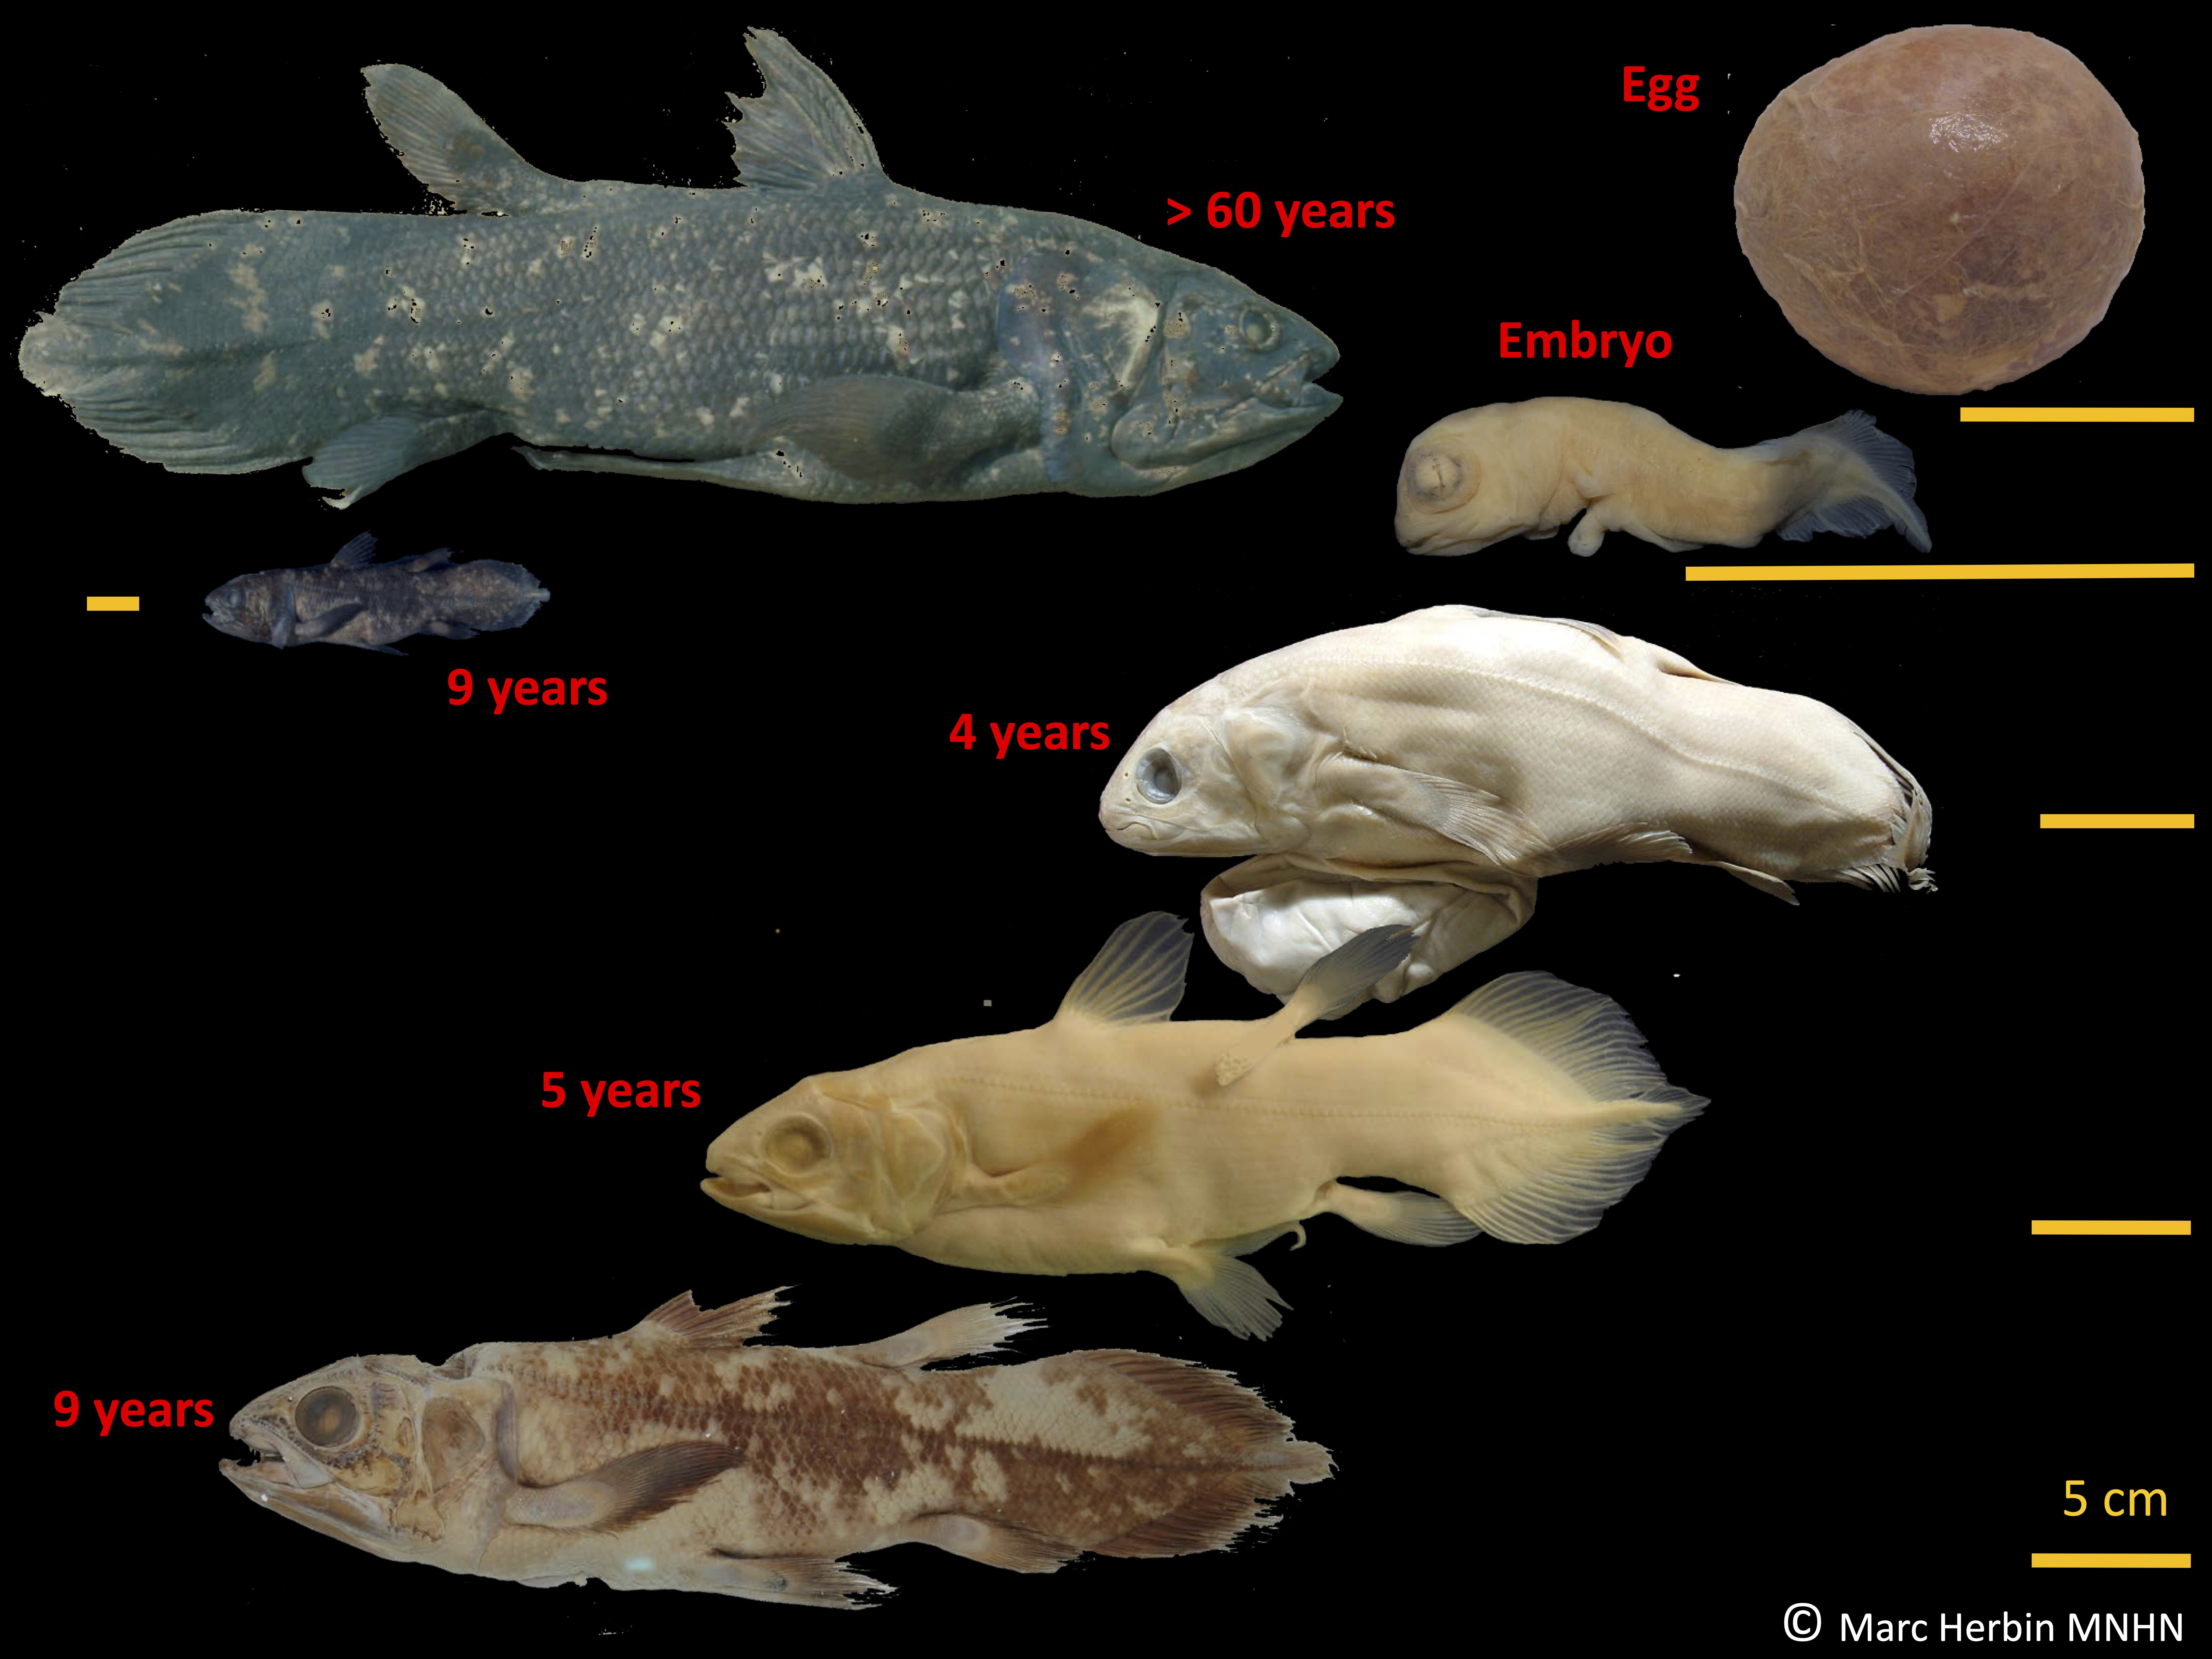 The development stages of the coelacanth fish